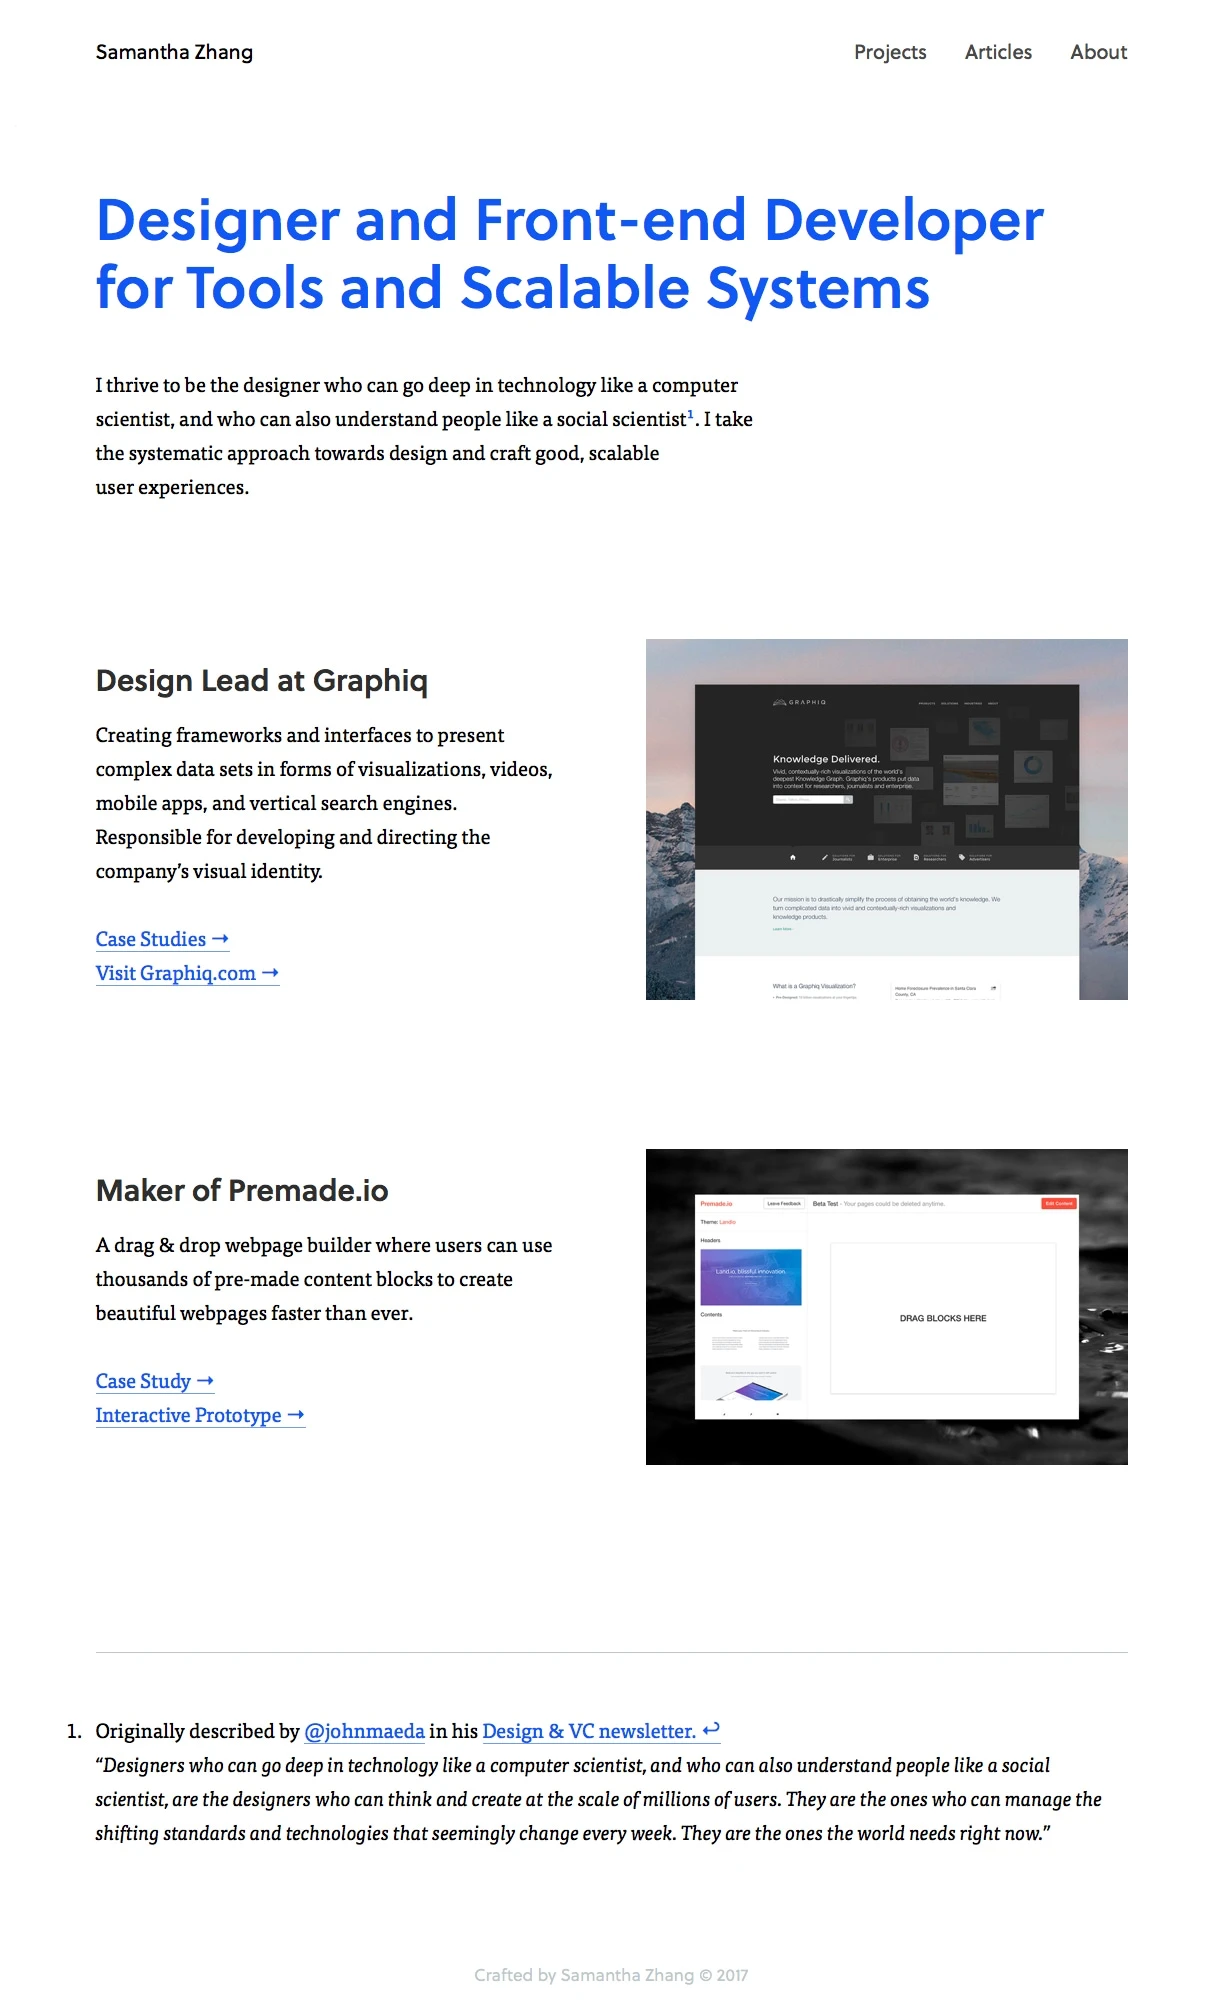 Samantha Zhang Landing Page Example: Designer and Front-end Developer for Tools and Scalable Systems